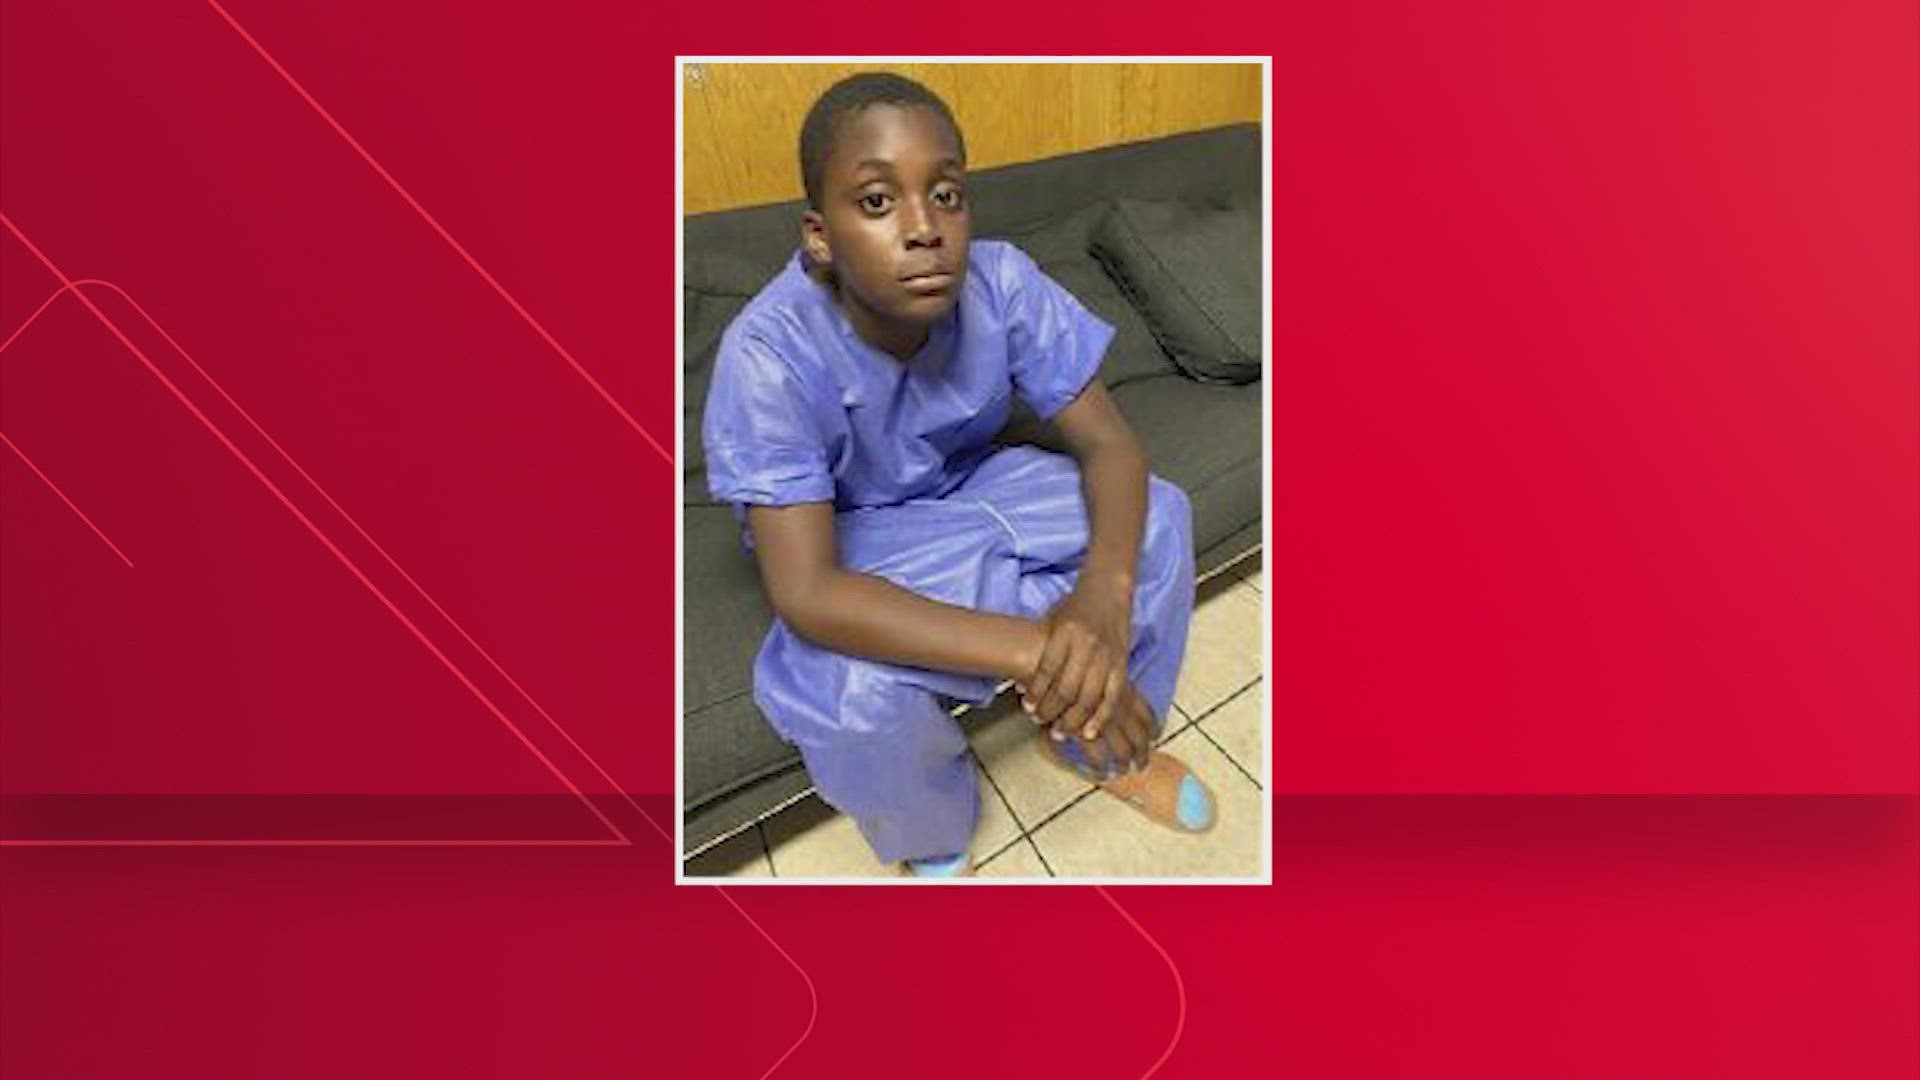 Harris County authorities are searching for missing 10-year-old Waylon Mack, who was last seen Friday, Aug. 5, 2022, in the Spring area.